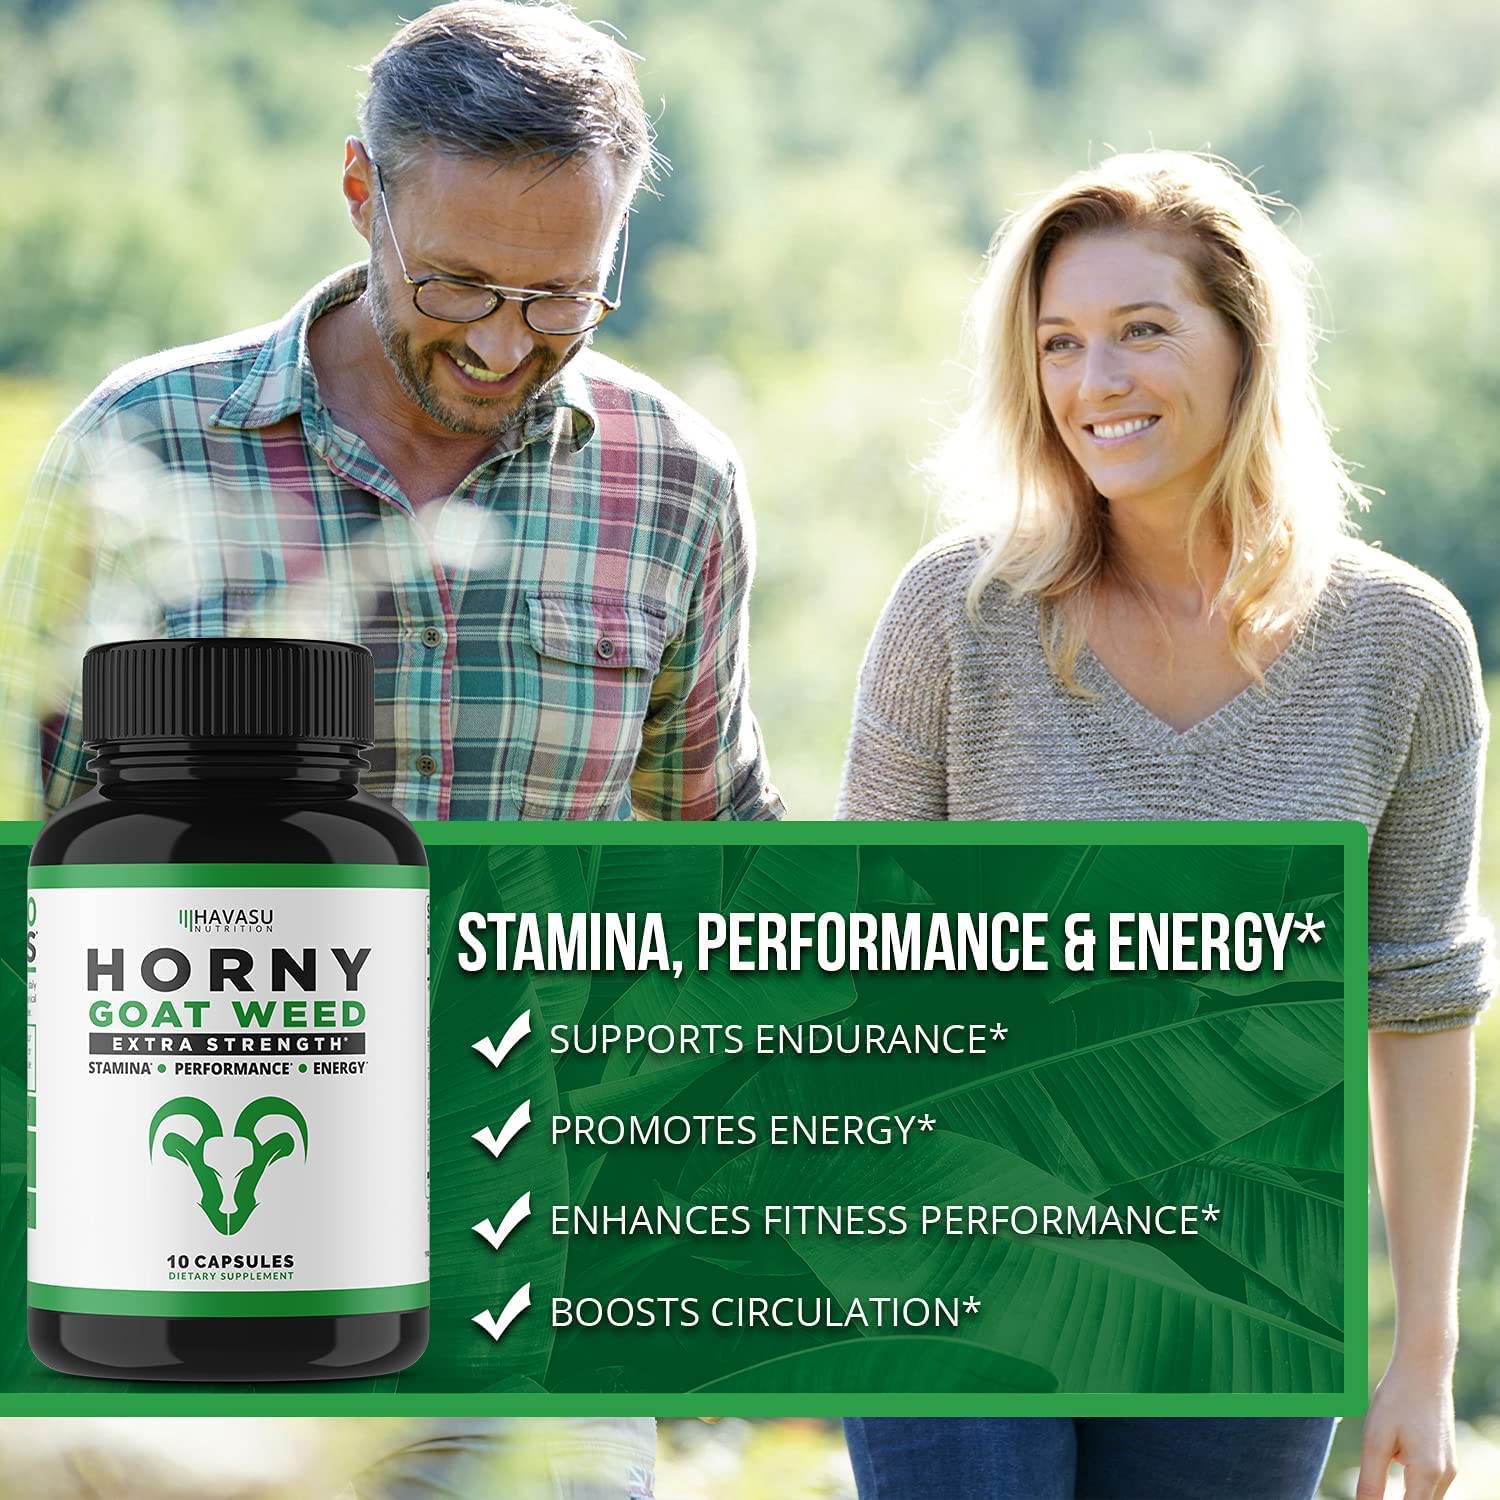 HAVASU NUTRITION L Arginine and Horny Goat Weed Bundle for Powerful Male Enhancing Supplement for Performance & Endurance Due to Increased Vascular Support